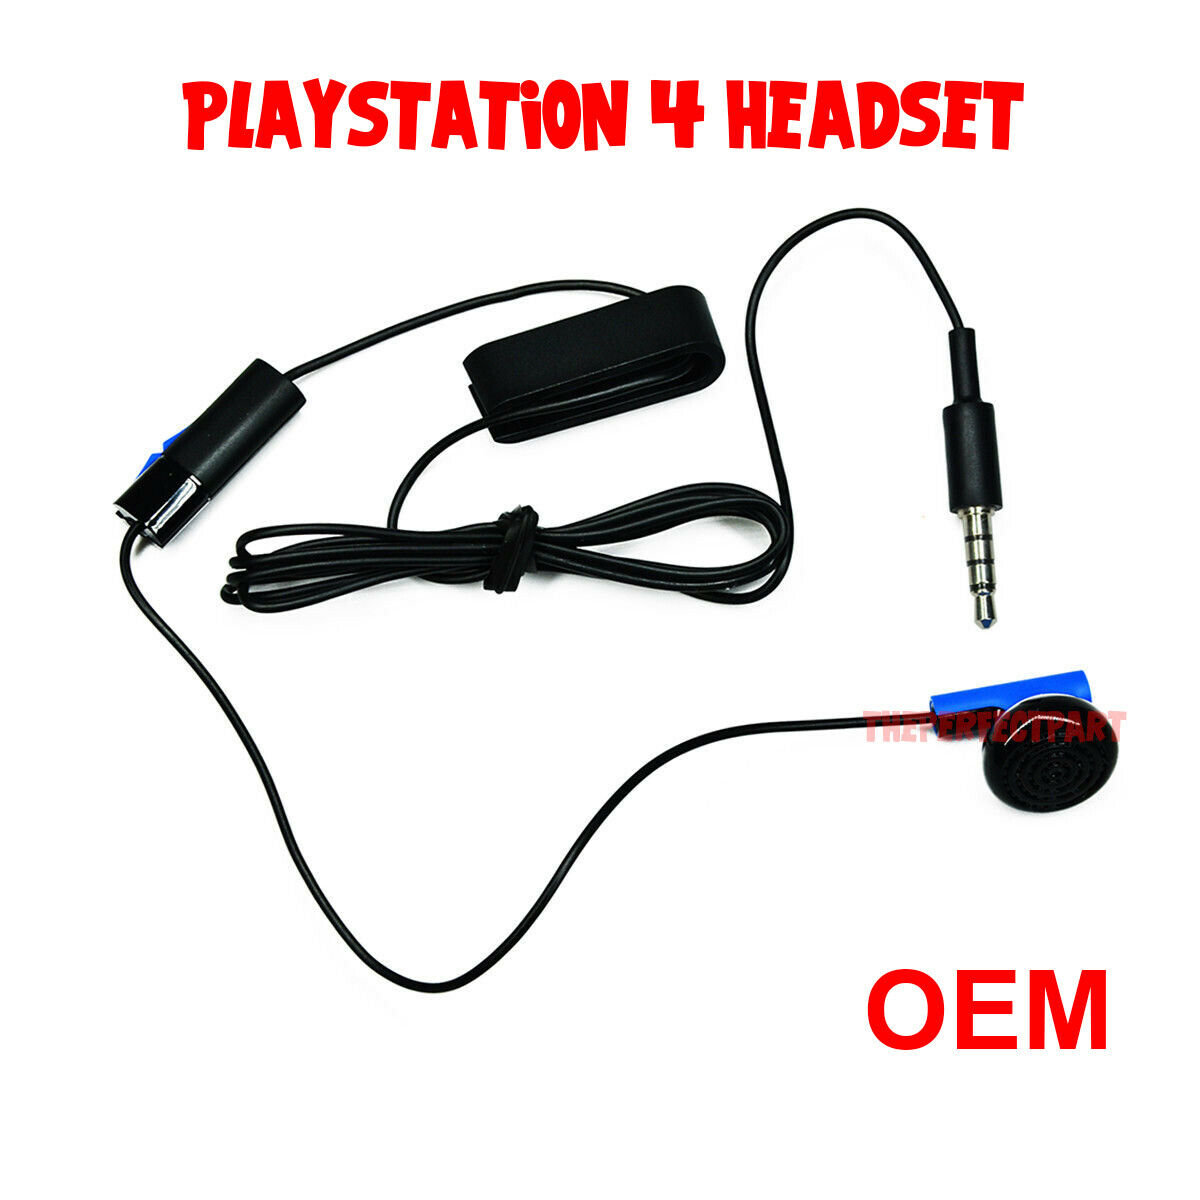 Oem Headset Earbud Microphone Earpiece Clip Original For Sony Playstation 4 Ps4